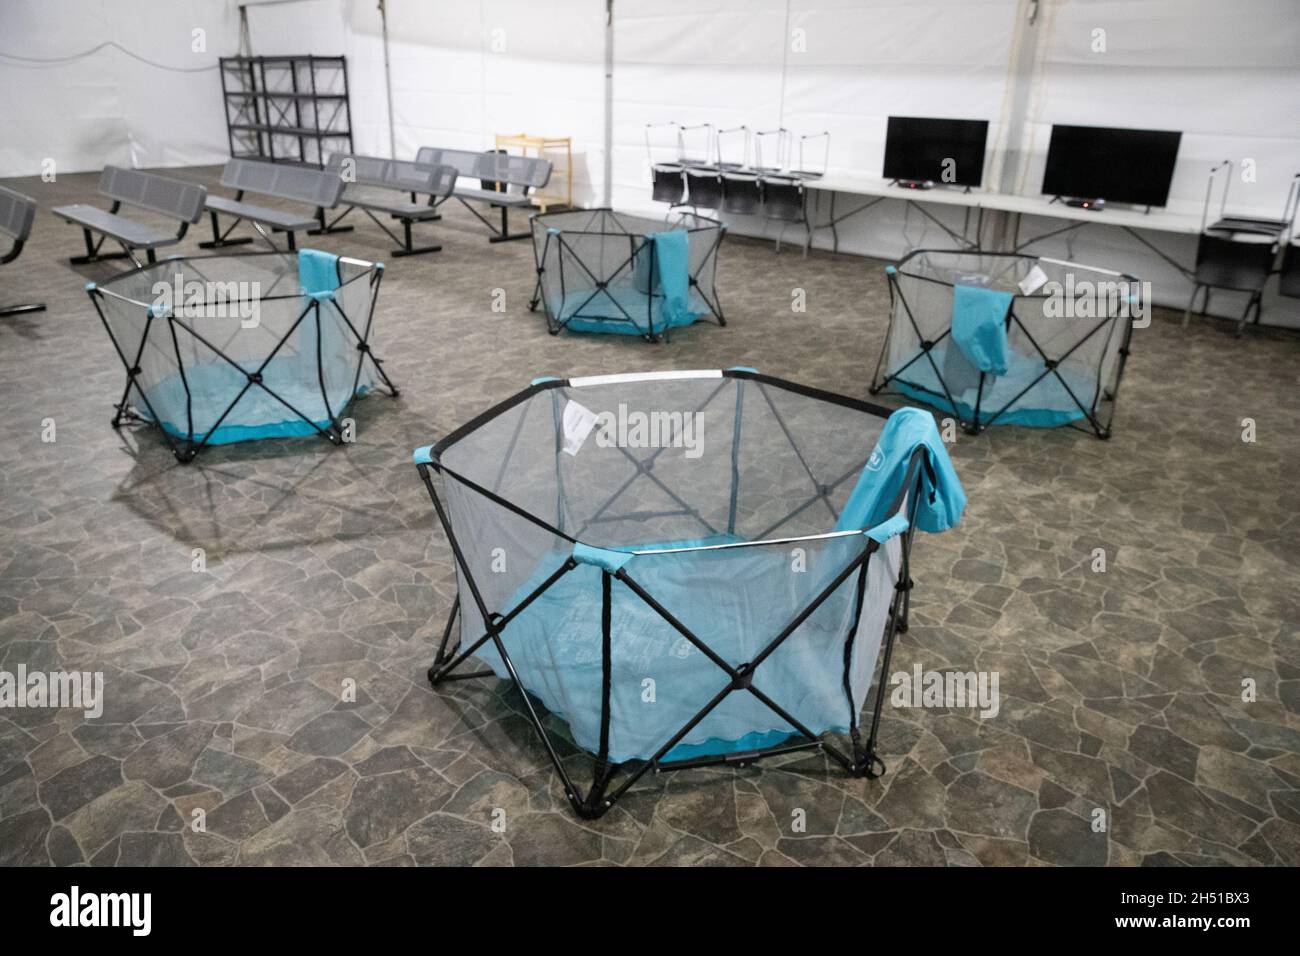 Donna, United States. 27 April, 2021. Playpens for unaccompanied migrant children at the U.S. Customs and Border Patrol immigration processing center May 7, 2021 in Donna, Texas.  Credit: Jerry Glaser/Homeland Security/Alamy Live News Stock Photo